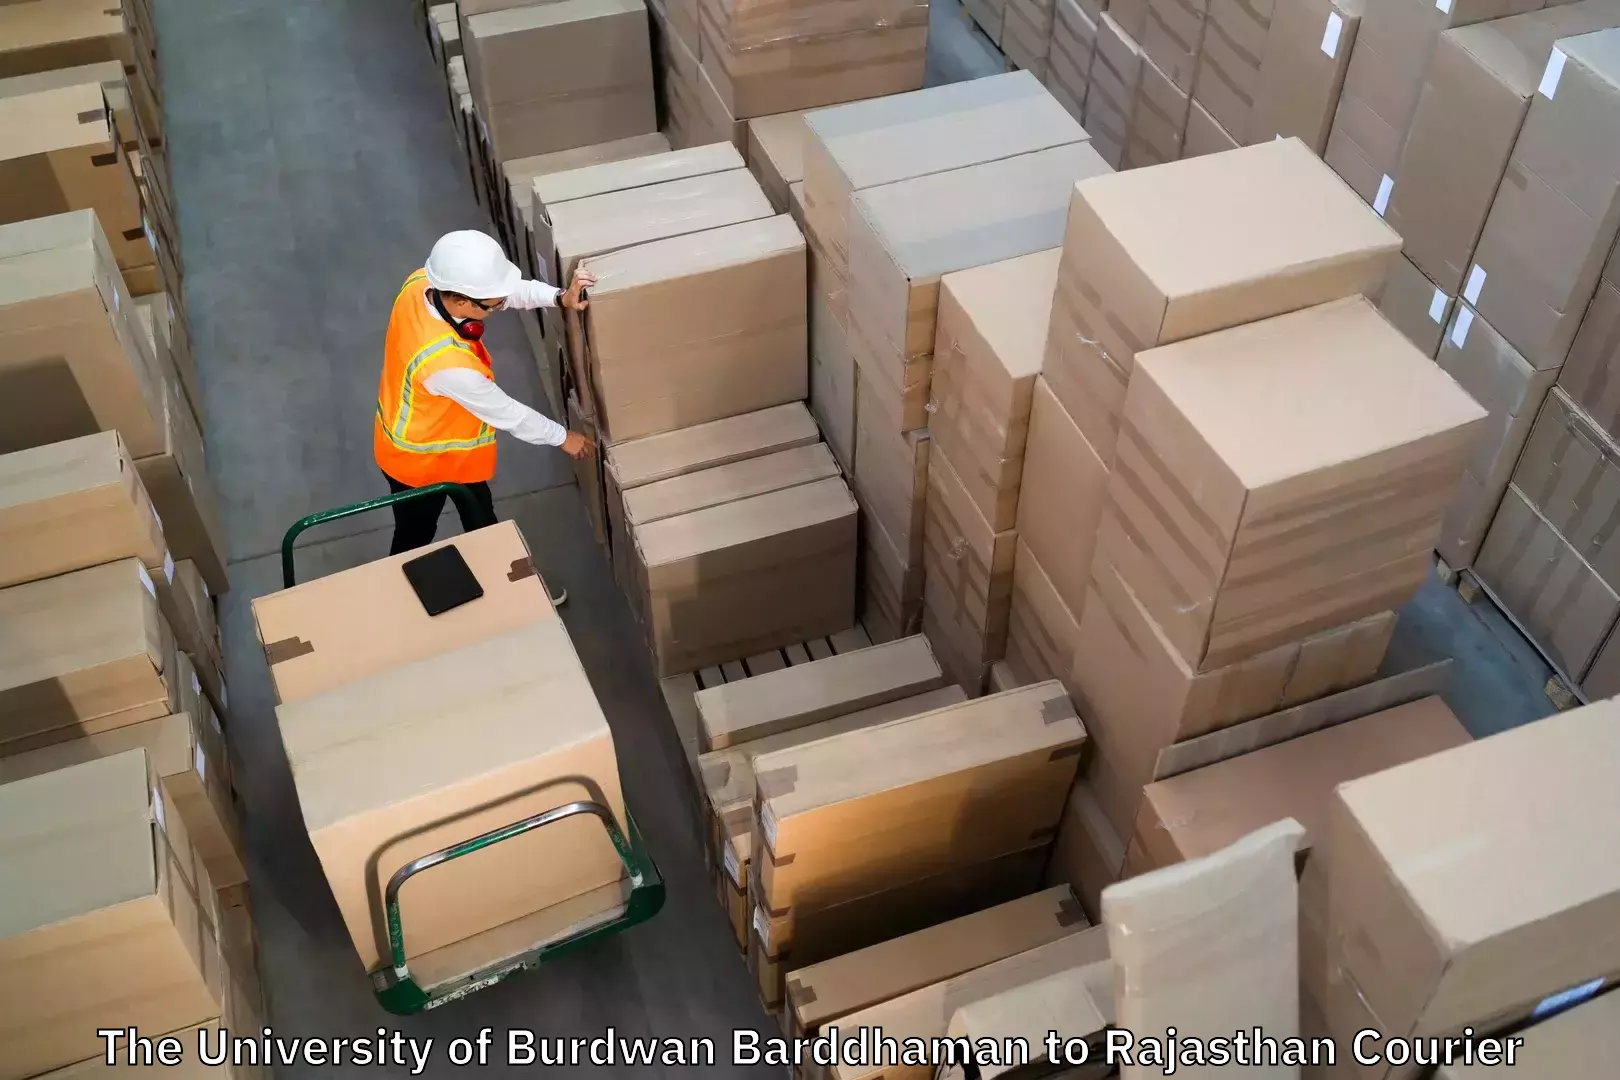 Baggage relocation service The University of Burdwan Barddhaman to Rajasthan